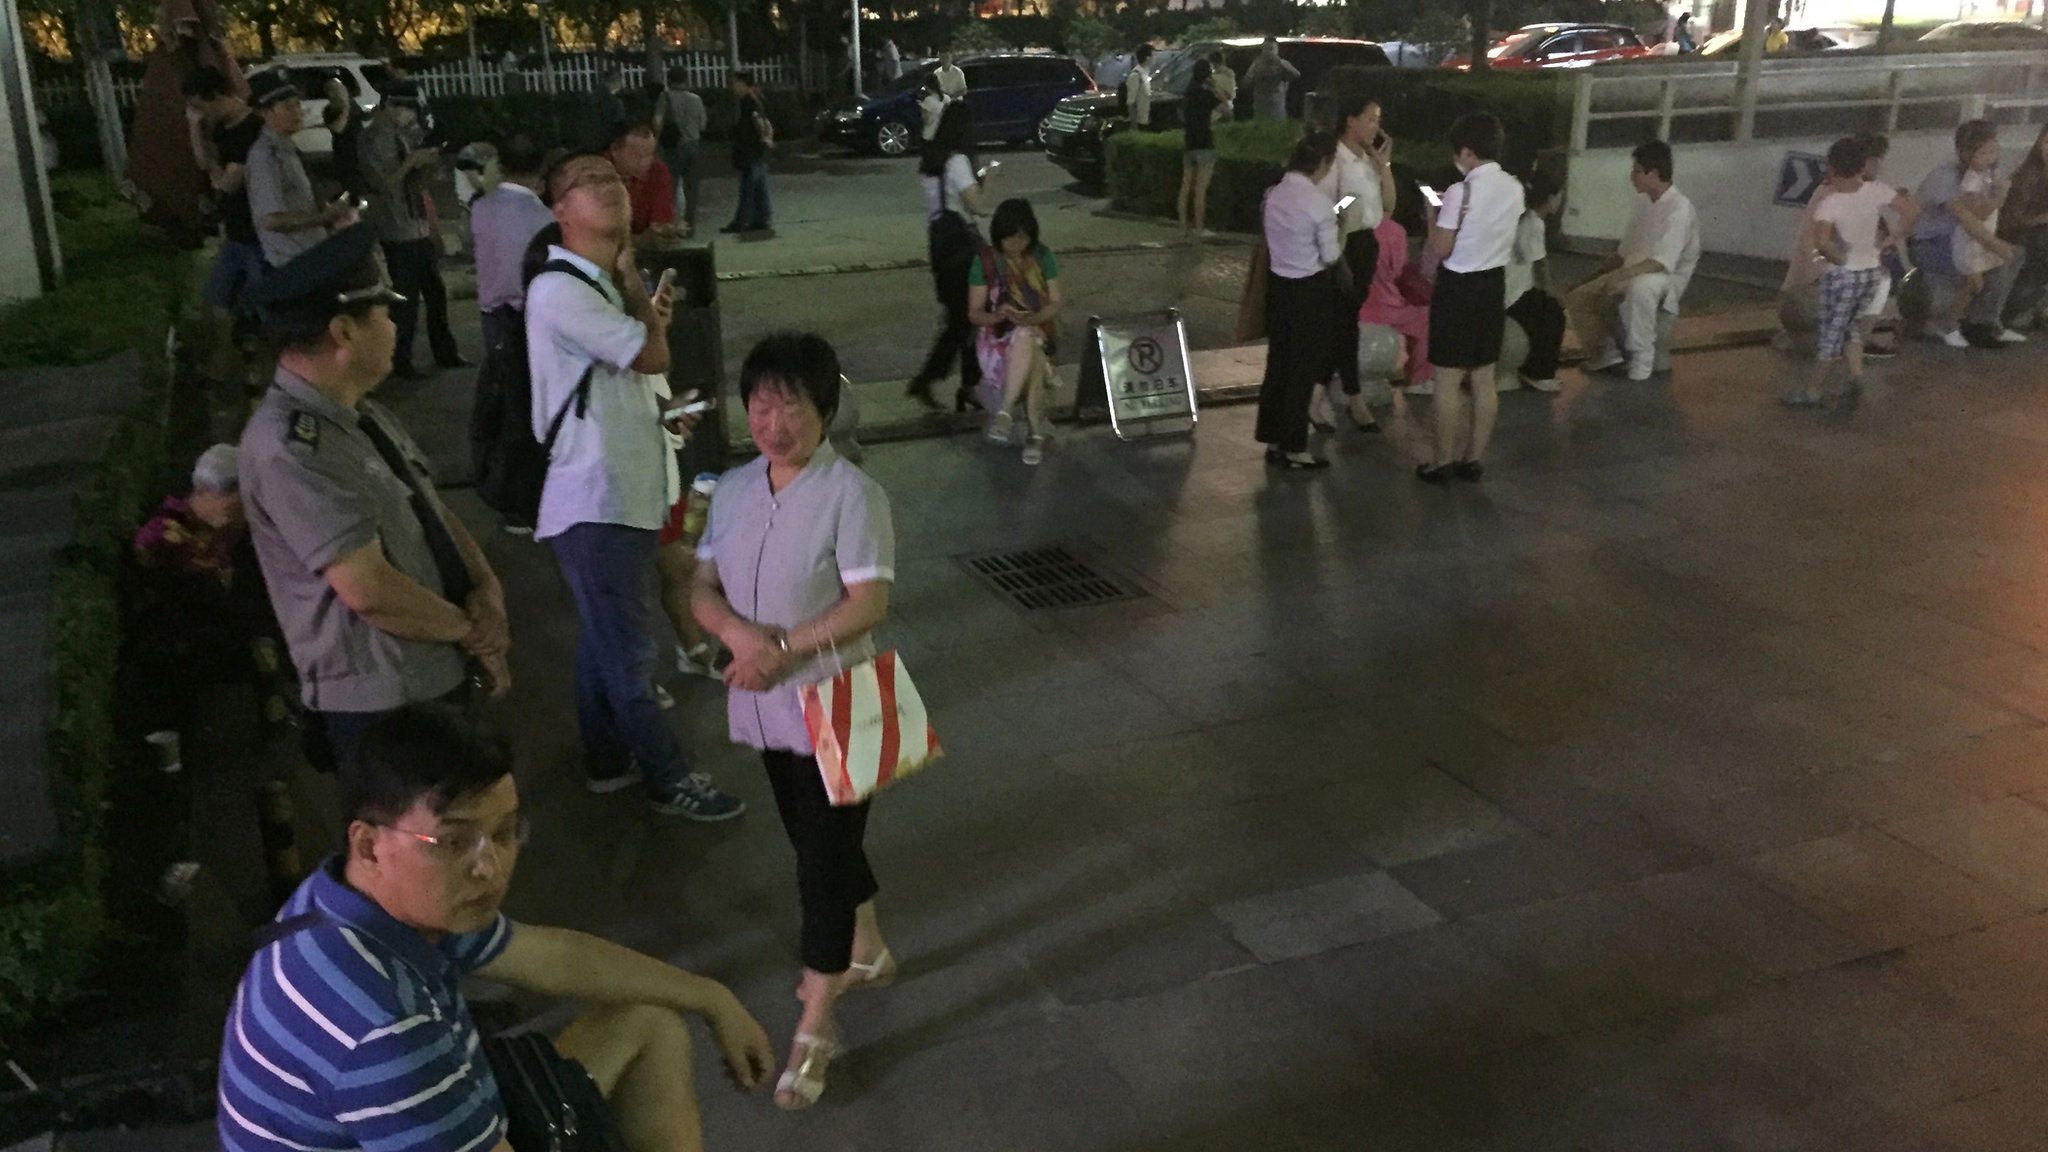 Residents gather outside buildings in Xian, China, on 8 August 2017